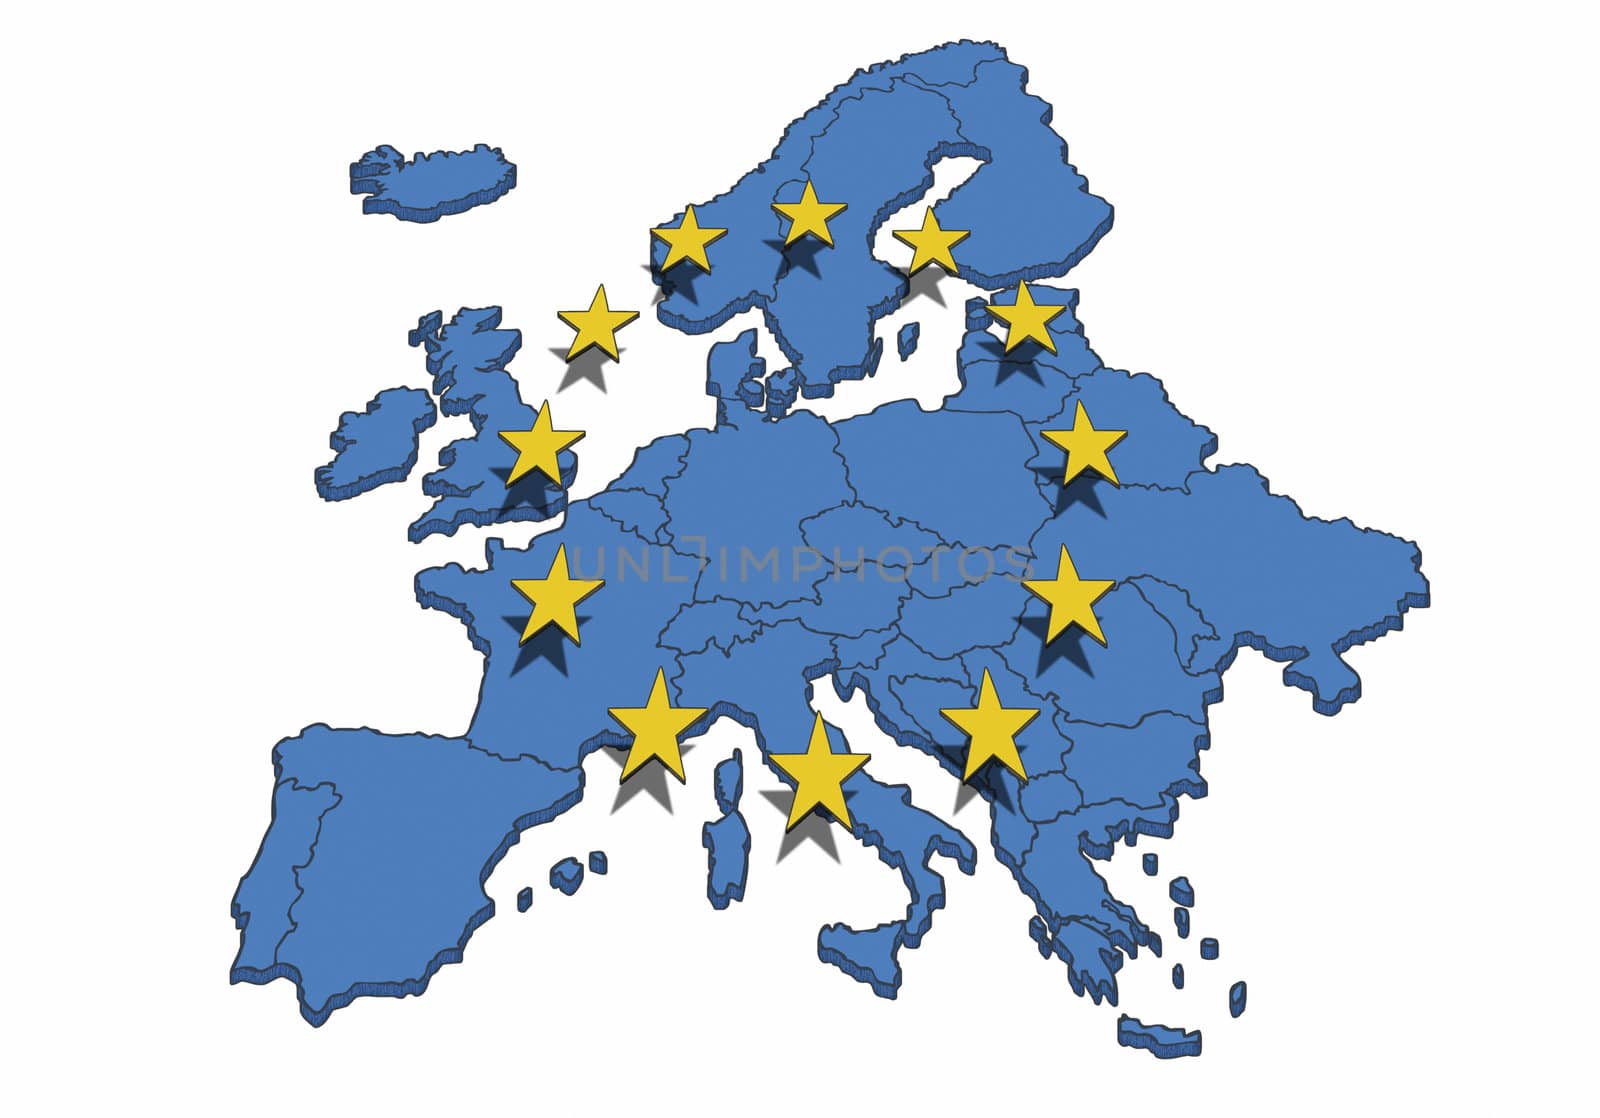 Map of the Europe with blue color and yellow stars. Symbol for the European Union.